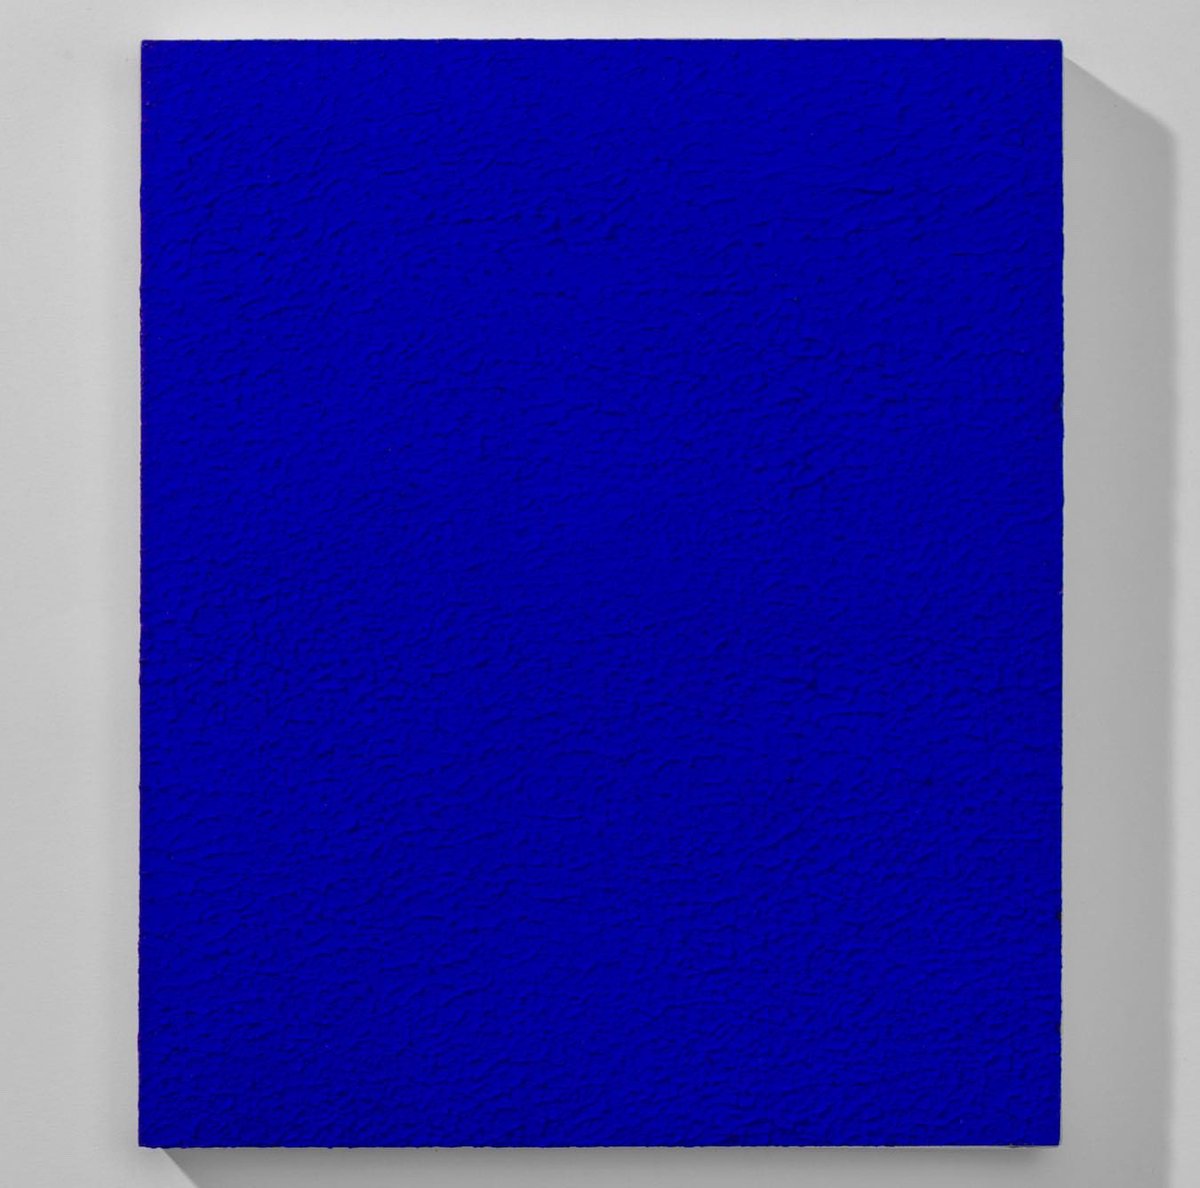 Copied/ Knocked-off/ Faux/ Cloned/ Forged/ Inspired/ or even an Homage to #YvesKlein. whatever you want to call it, I accept. My #art was created out of the love of his #InternationalKleinBlue color.
.
Swipe 👉🏼
Image 1 & 2 are my painting showing the texture. Image 3 is IKB 242 A